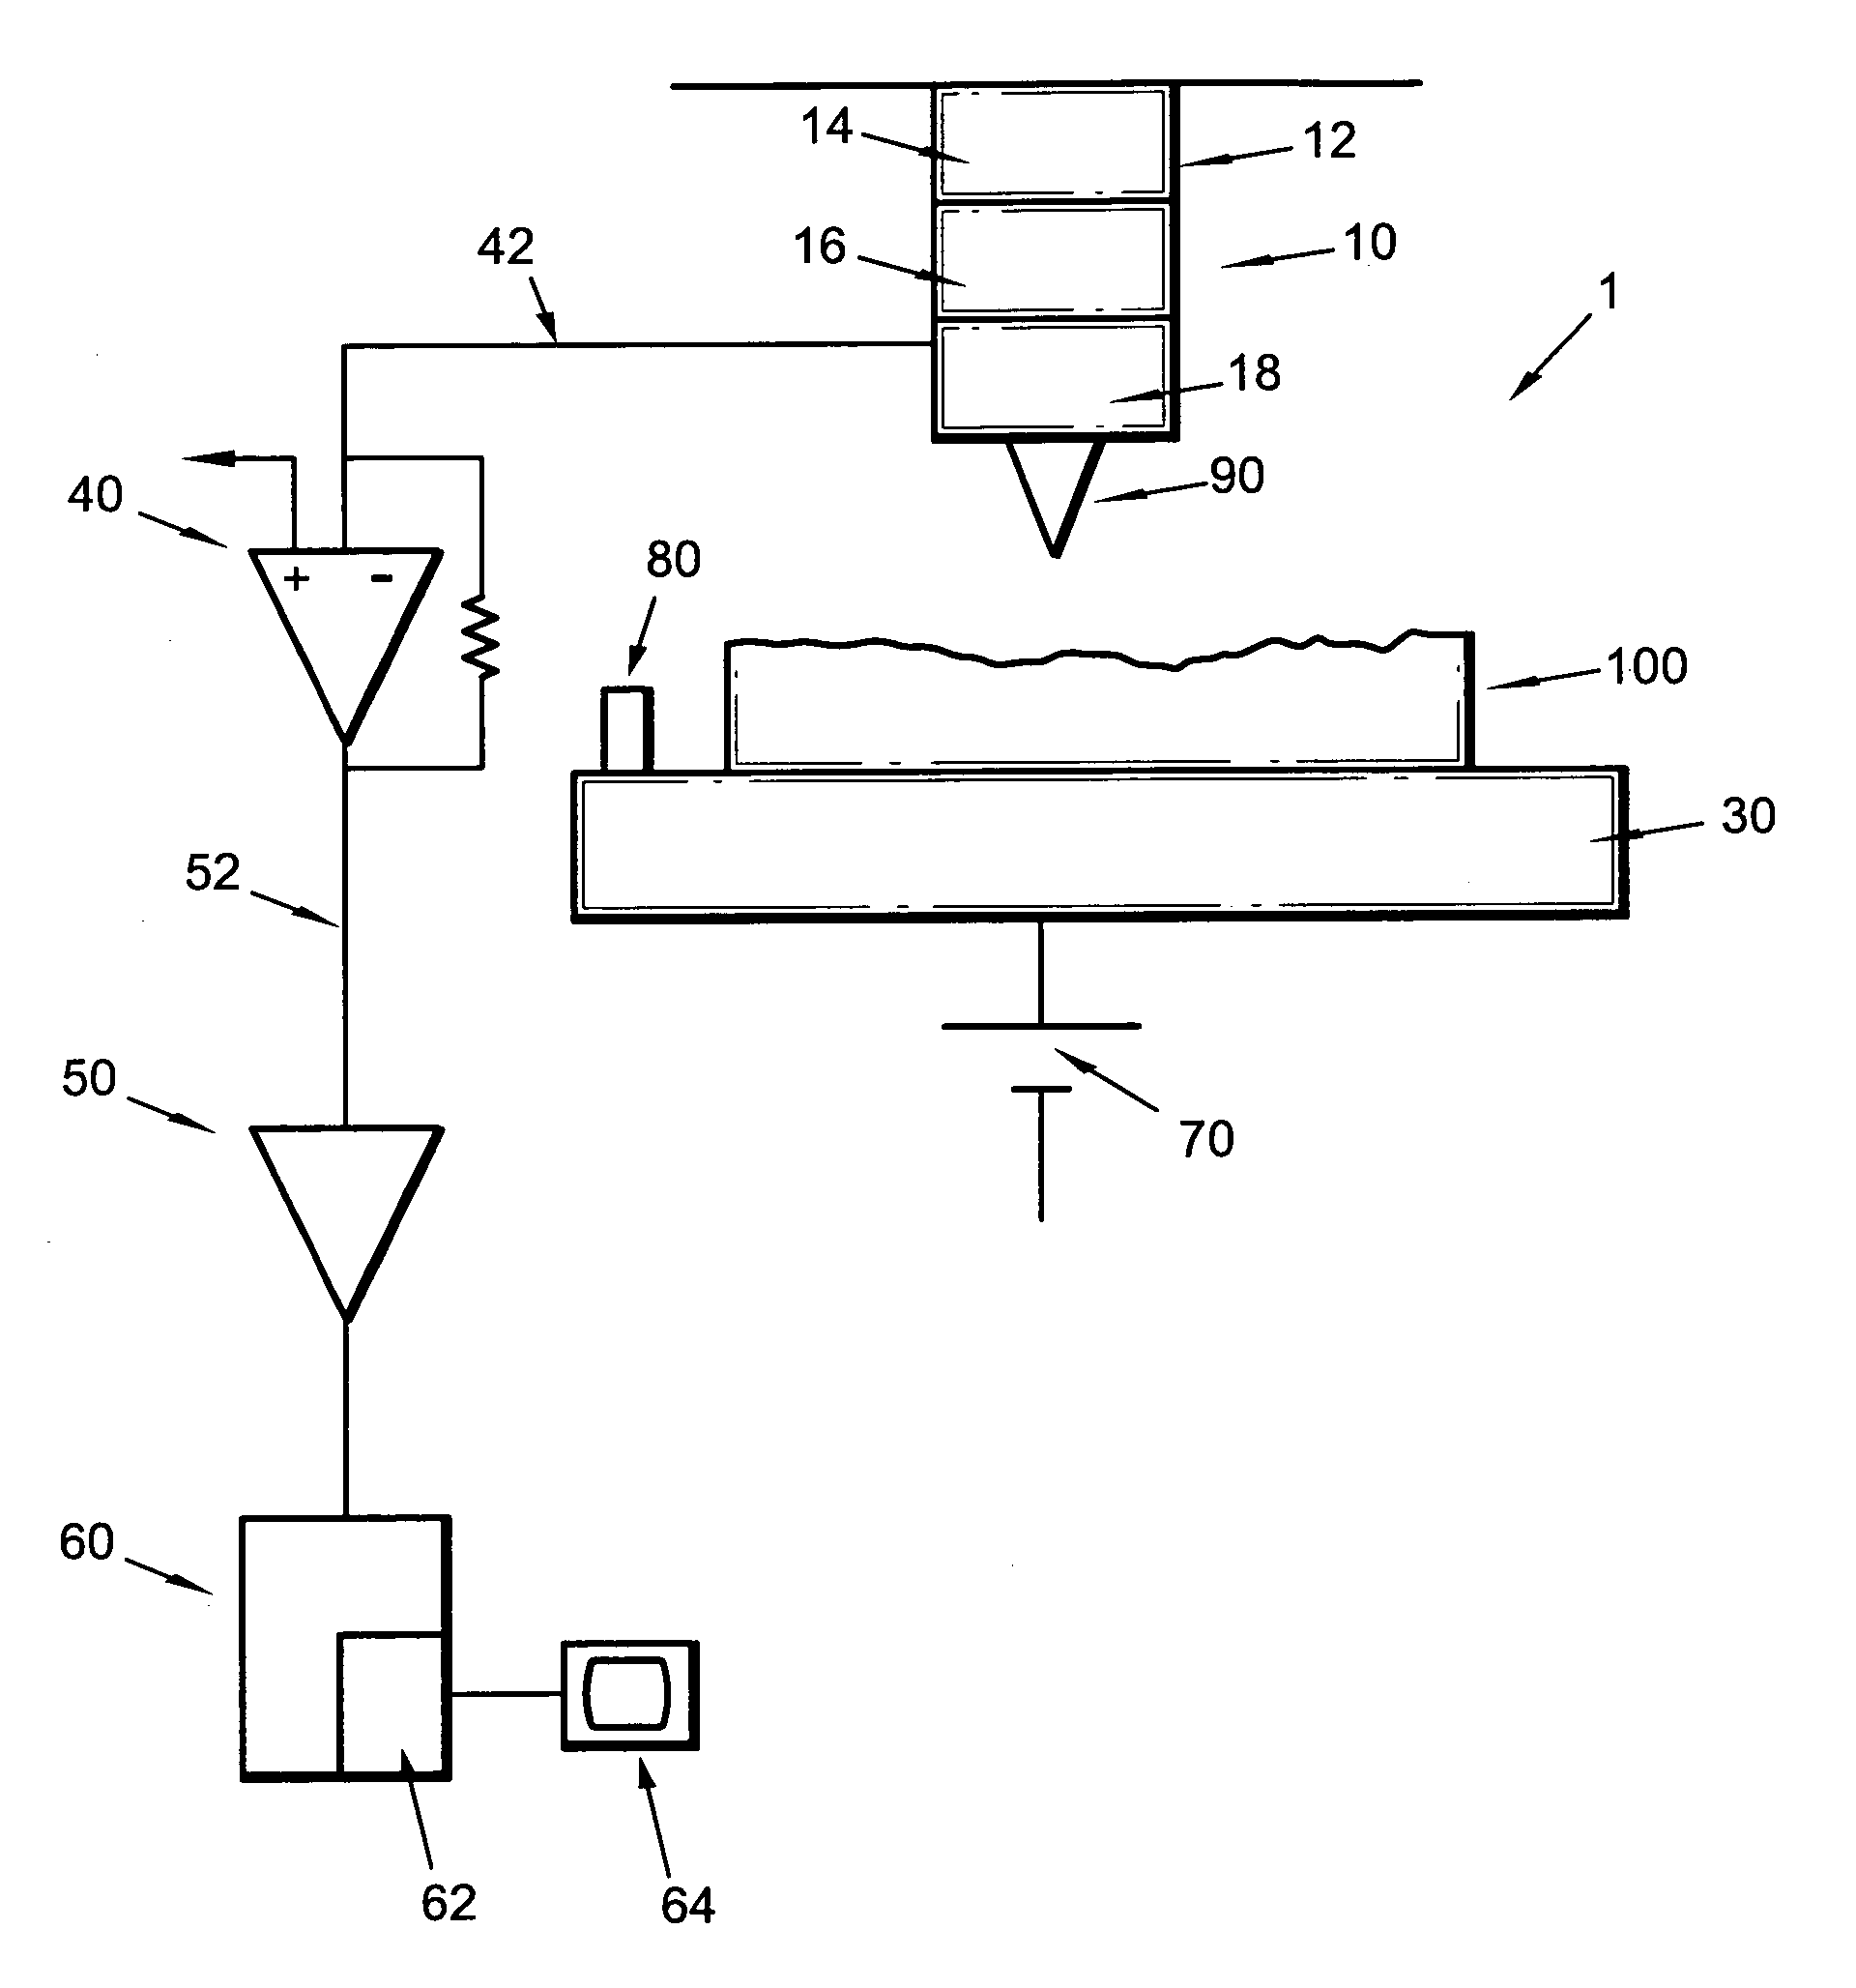 Atomic force microscope and method for determining properties of a sample surface using an atomic force microscope